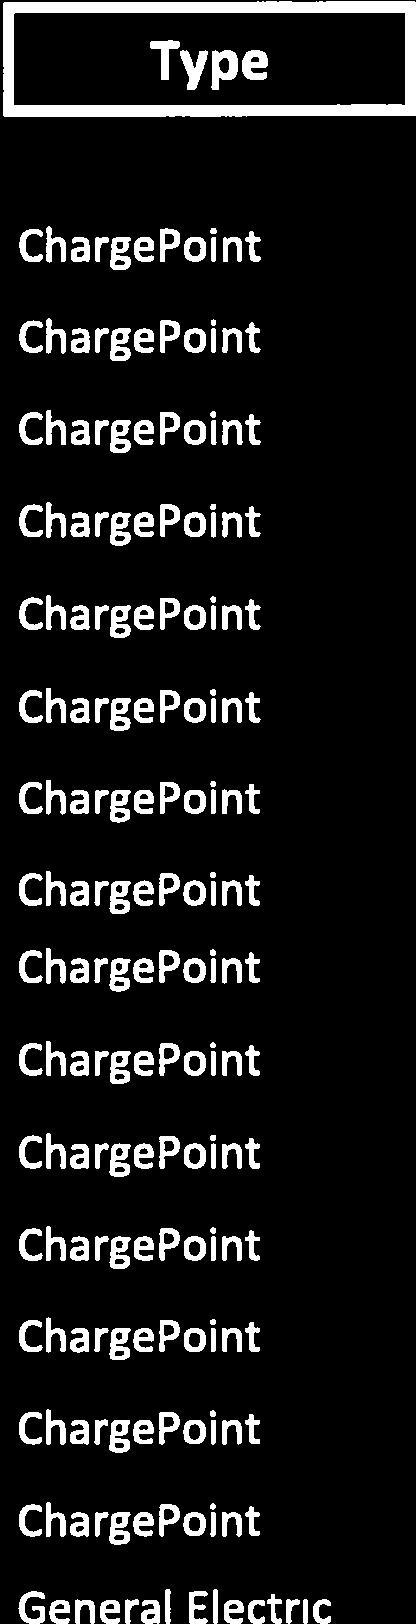 Feb-12 ChargePoint 4 440 N. Camden Drive 2 2 2 Feb-12 ChargePoint 5 450 N.